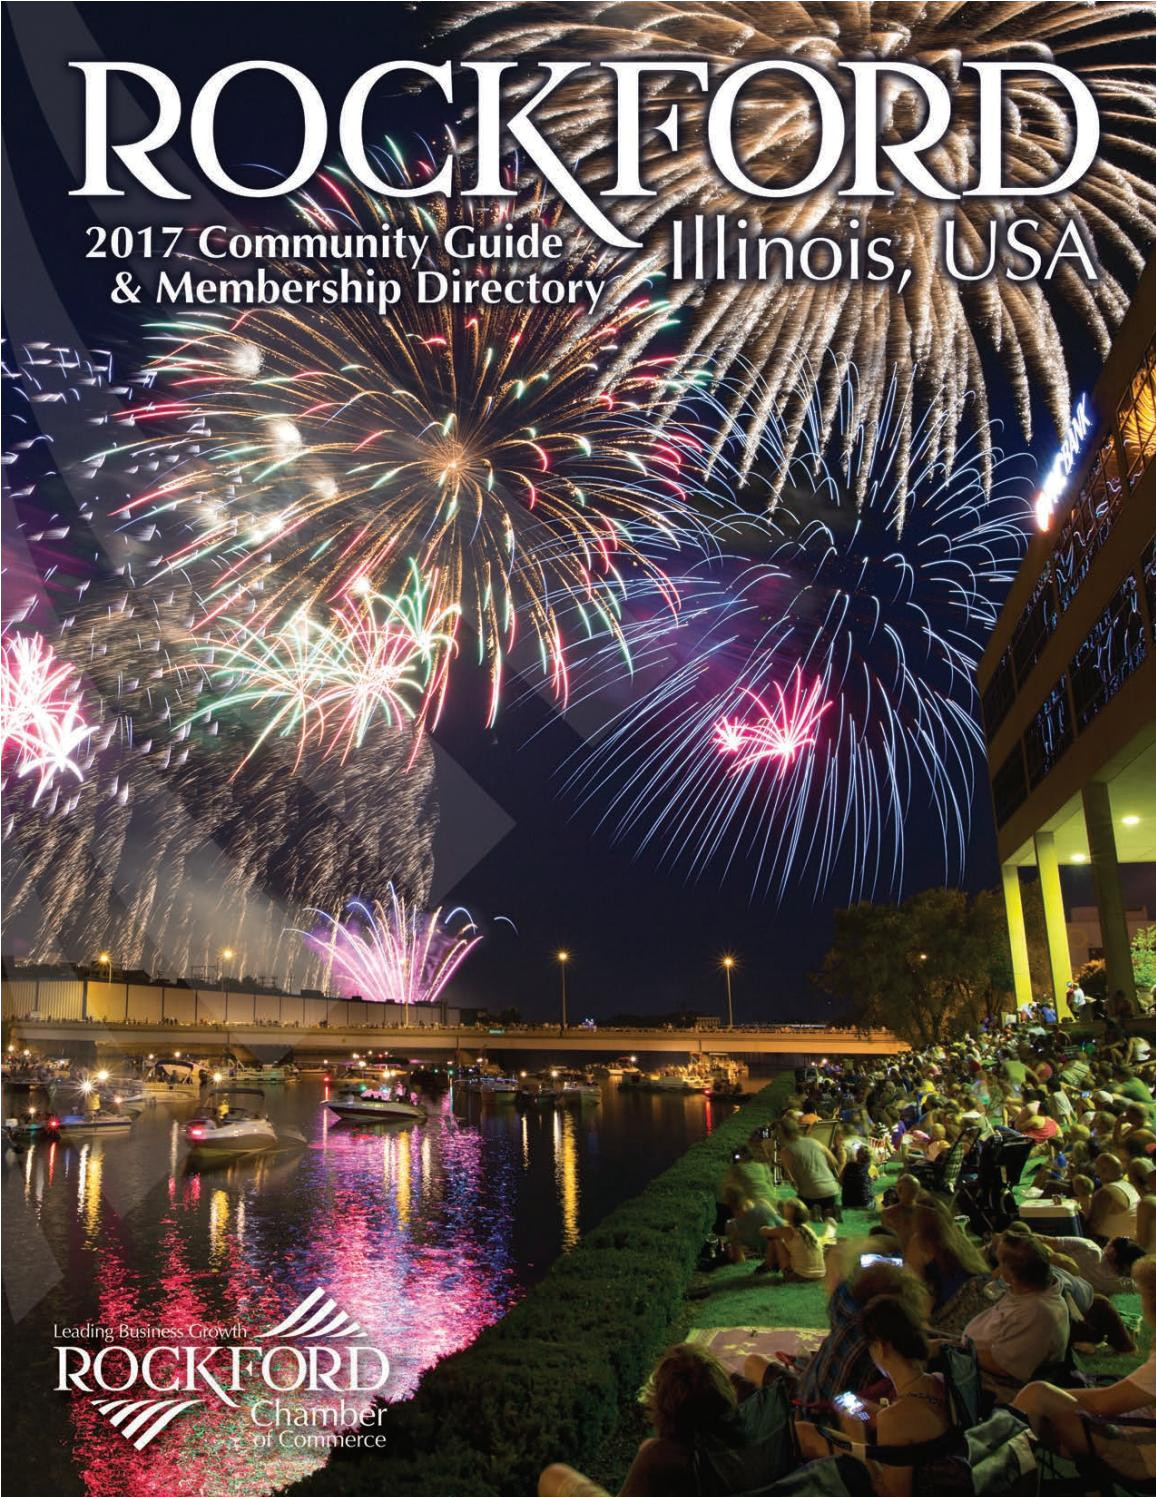 2017 rockford chamber community guide membership directory by rockford chamber of commerce issuu